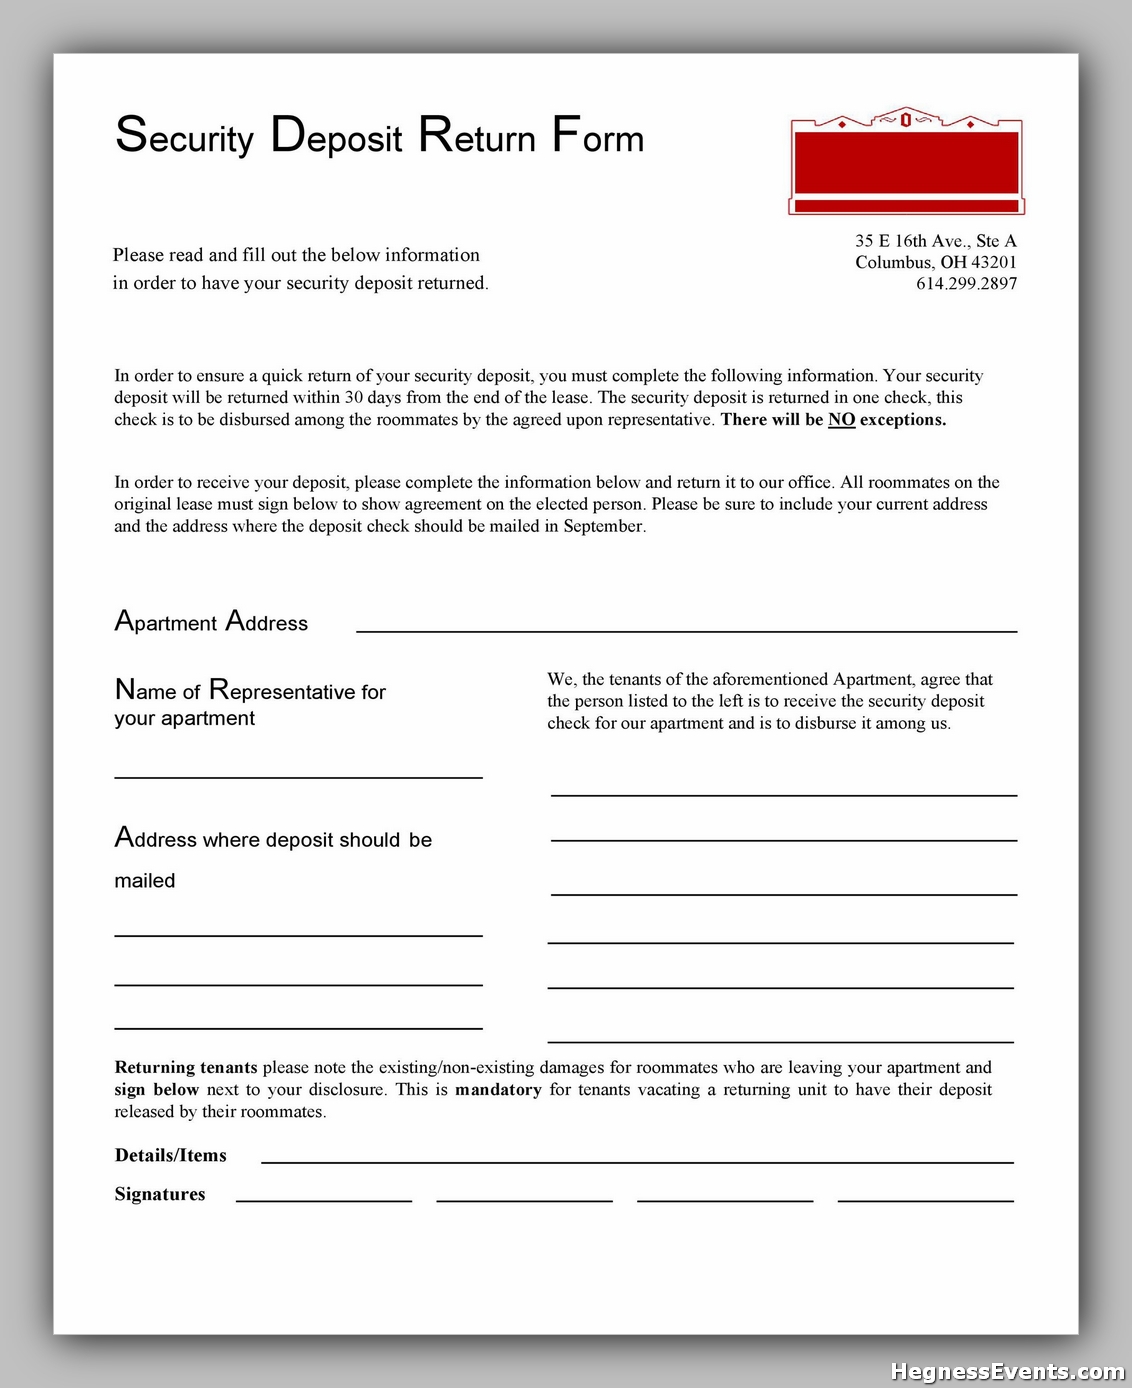 8-simple-security-deposit-form-for-your-legally-agreement-hennessy-events